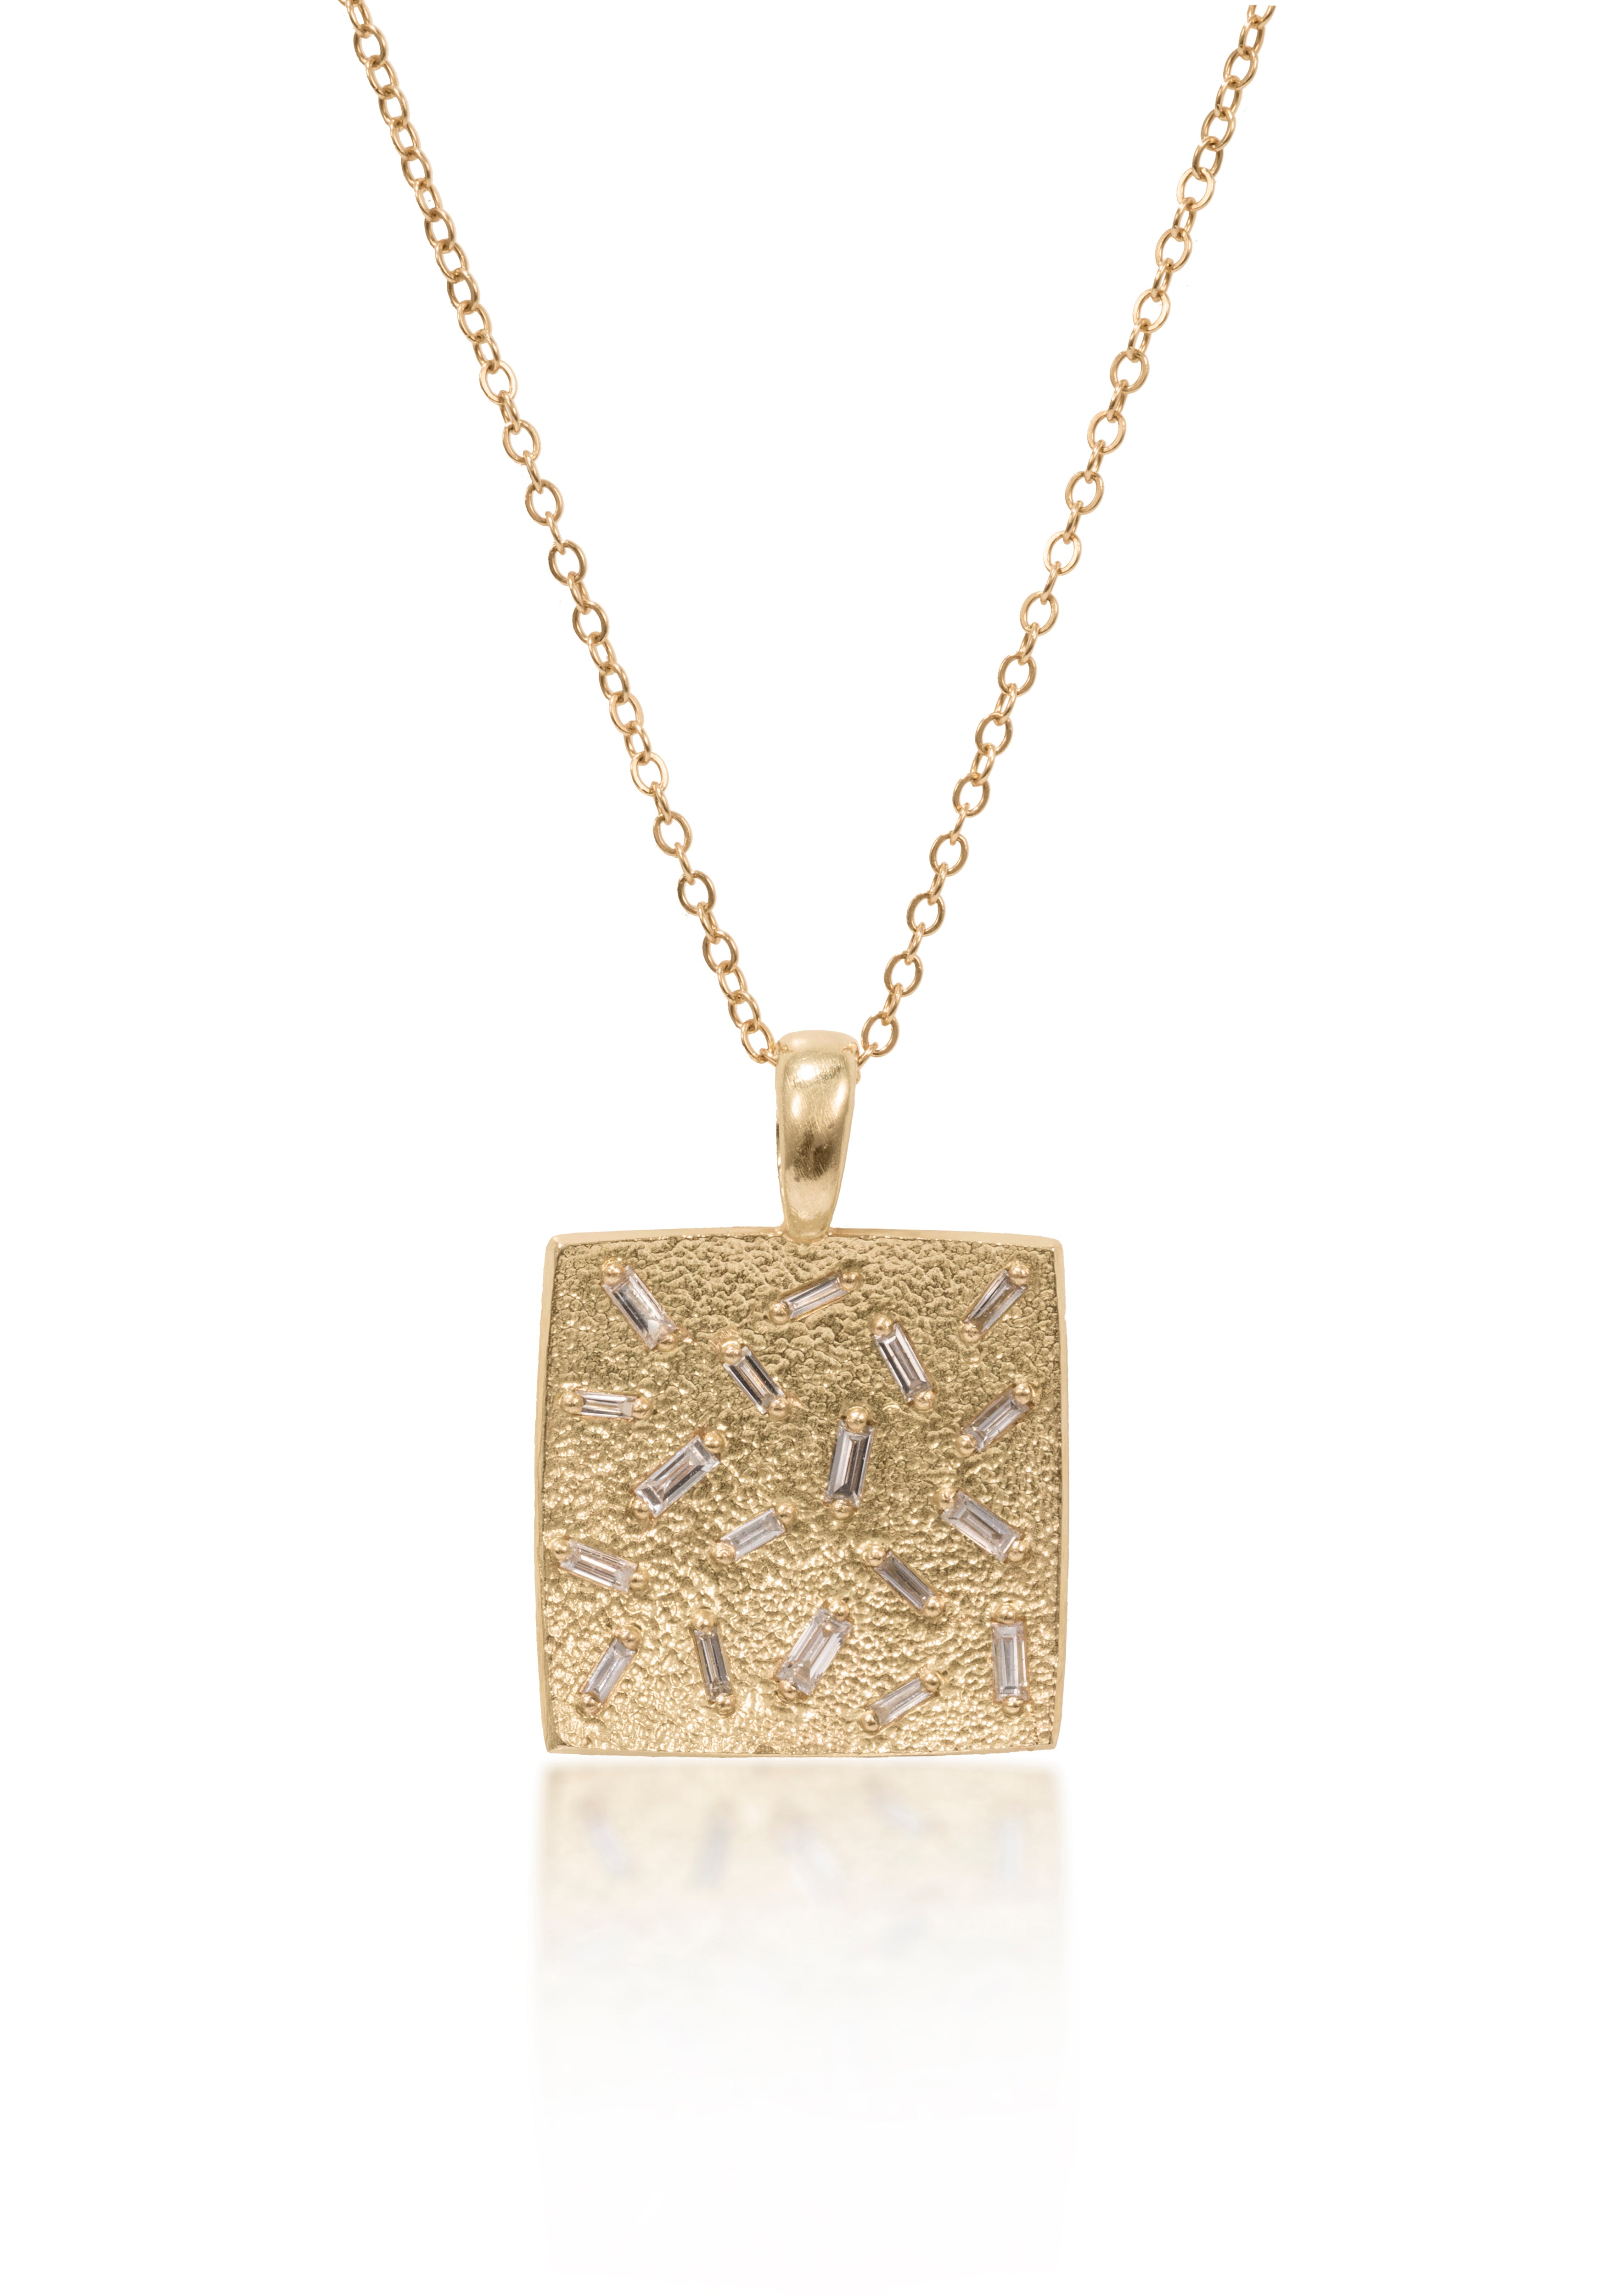 This medium size square pendant is set with 18 white diamond baguettes. Richly textured to shimmer in the light, this piece is available in three color ways, oxidized silver, 18k gold and palladium.  0.486 tcw.